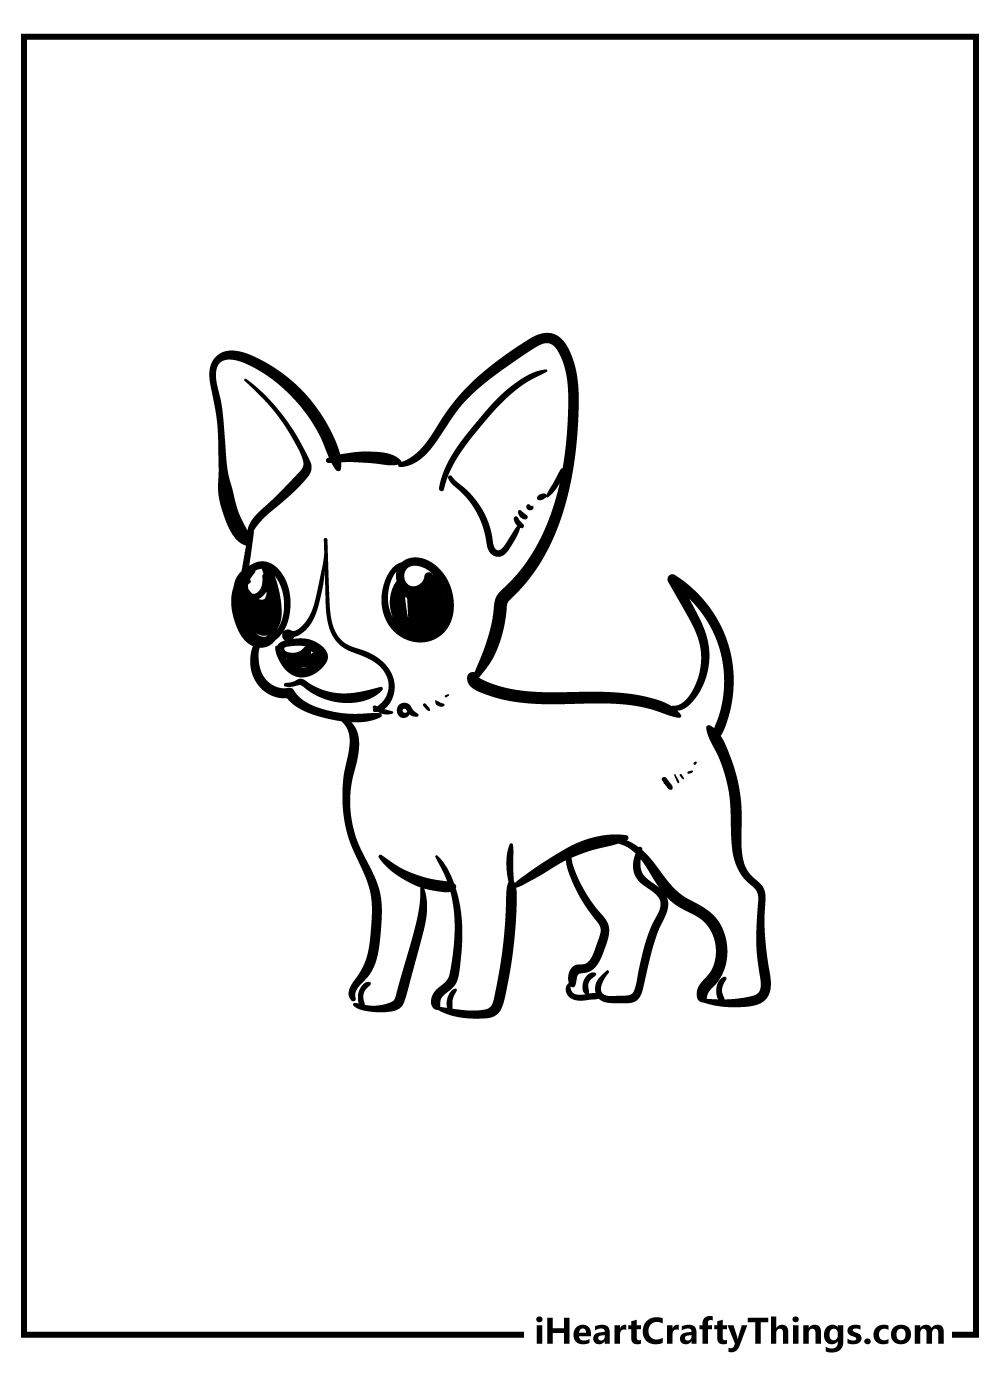 Chihuahua Coloring Original Sheet for children free download